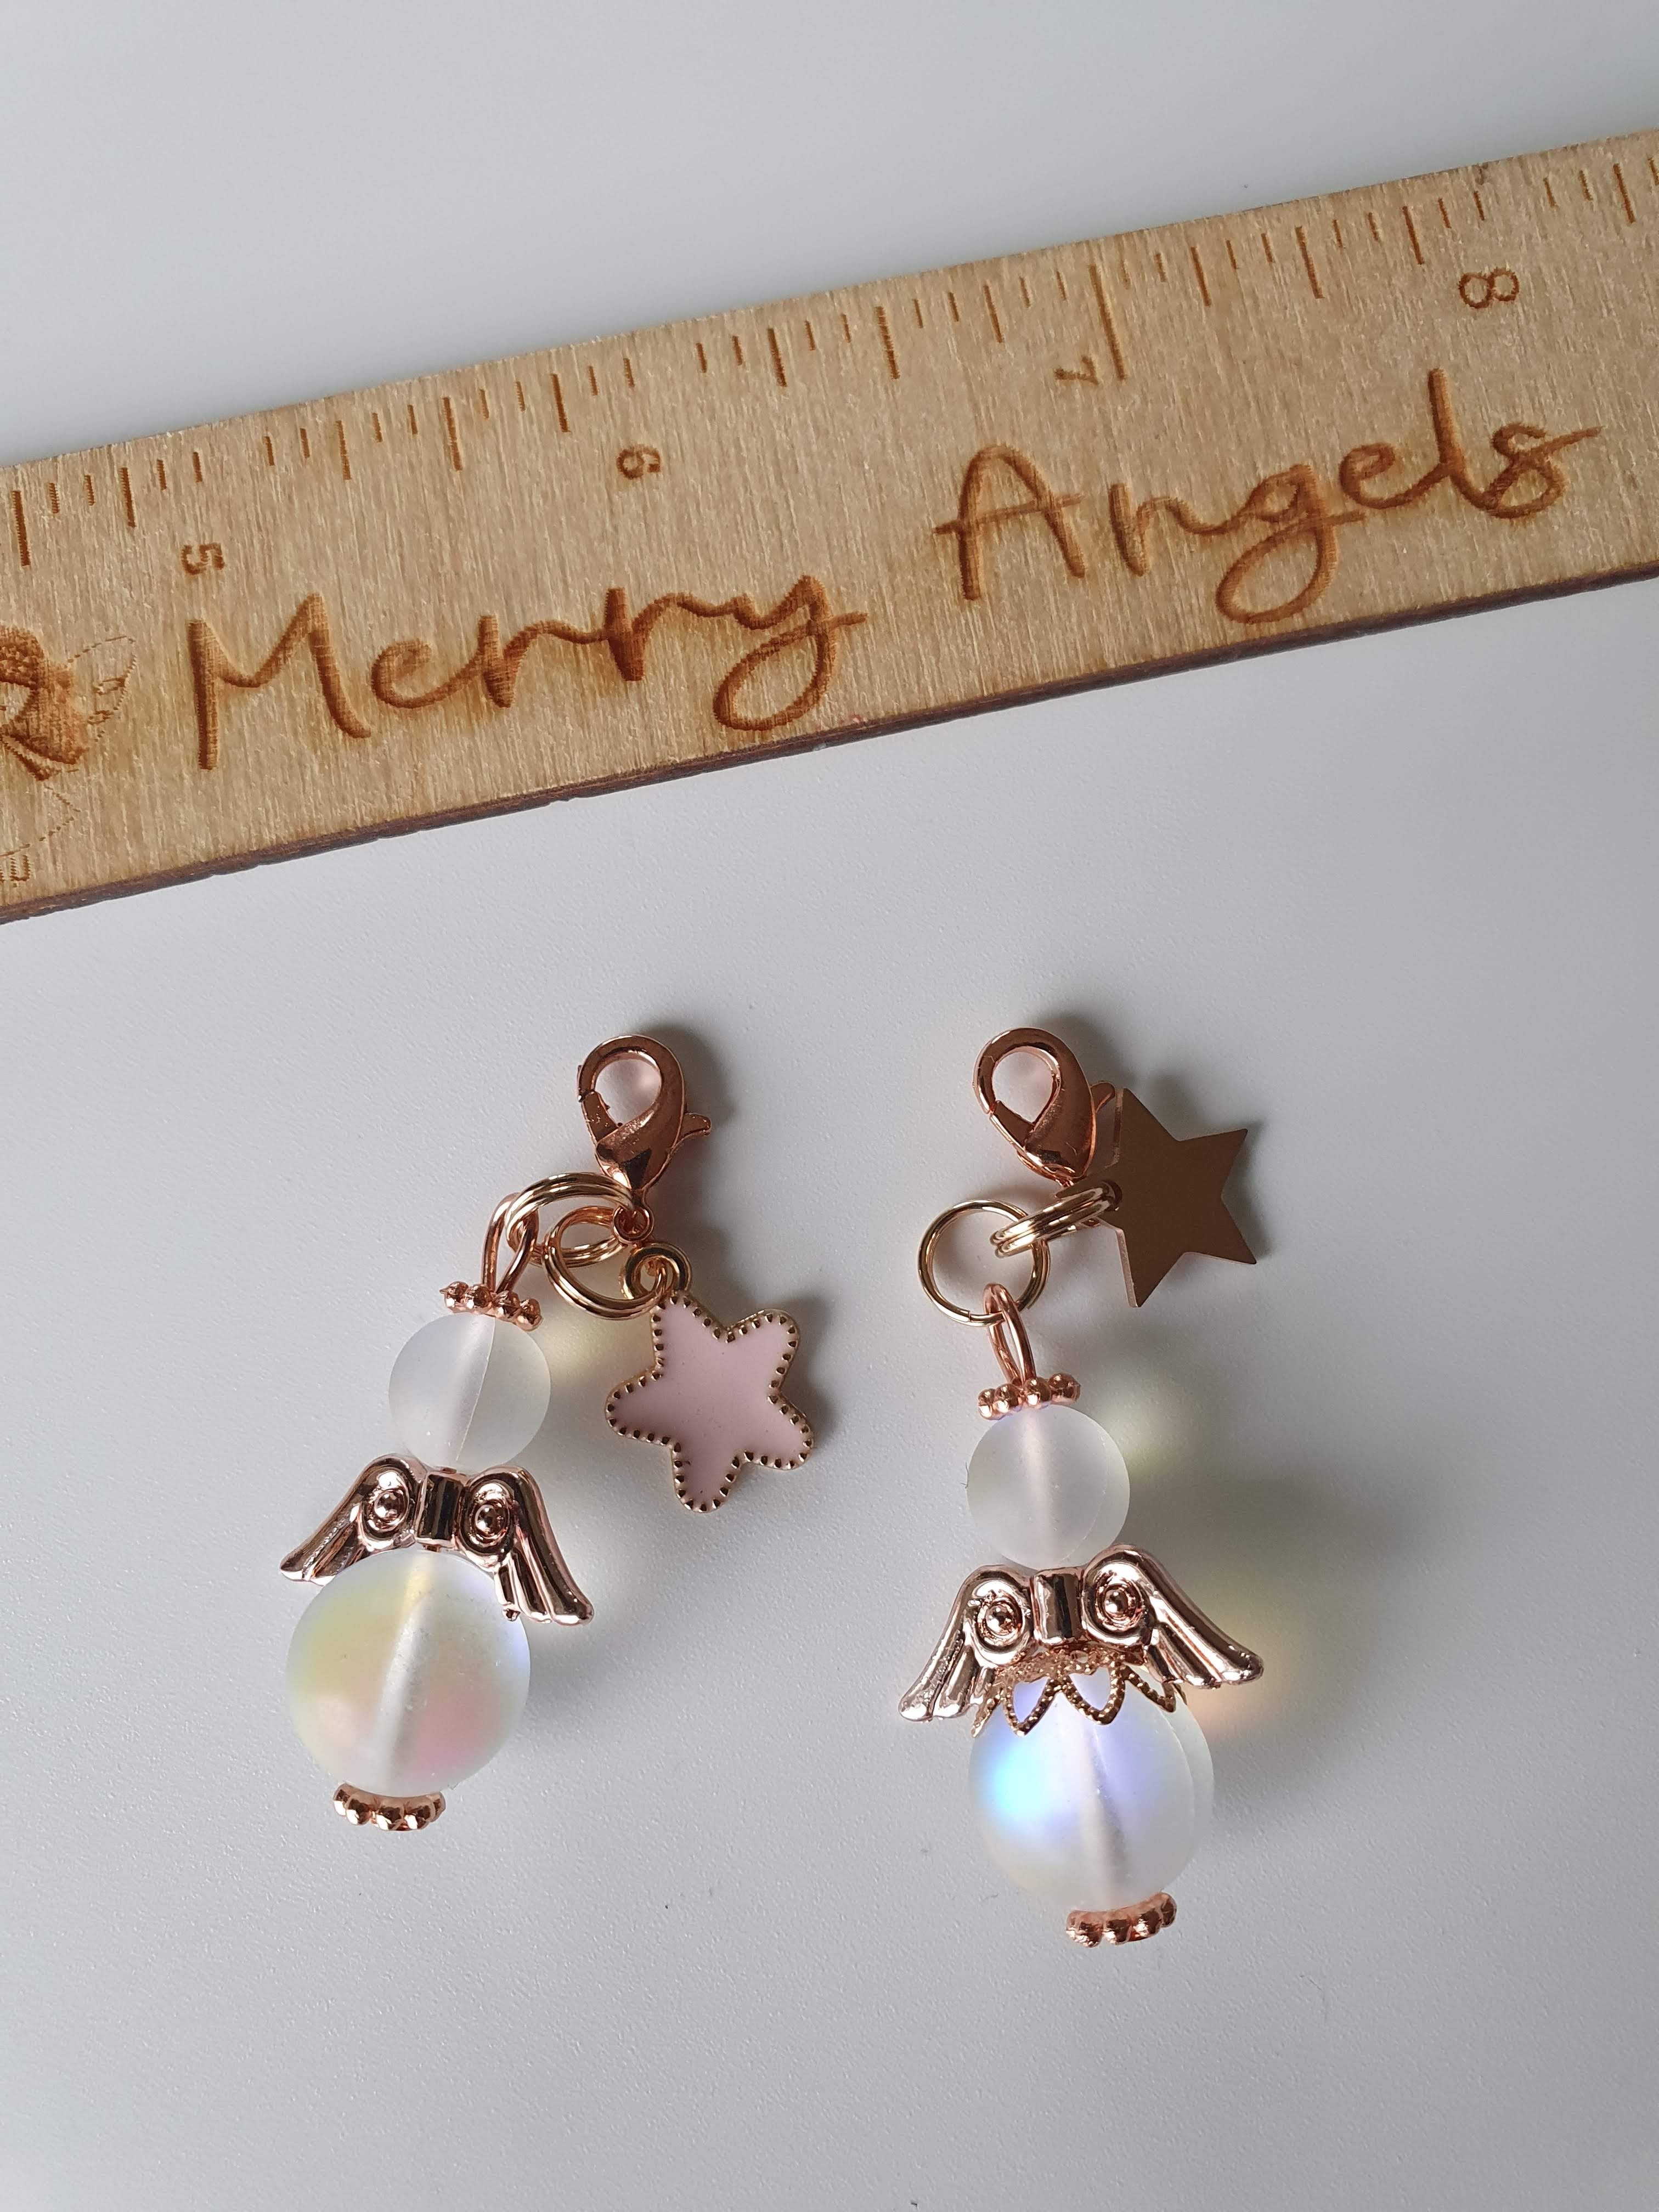 This is a picture of two angel hugs. The heads and bodies of the angels are white with rose gold wings and feet. Both angels have star charms attached.